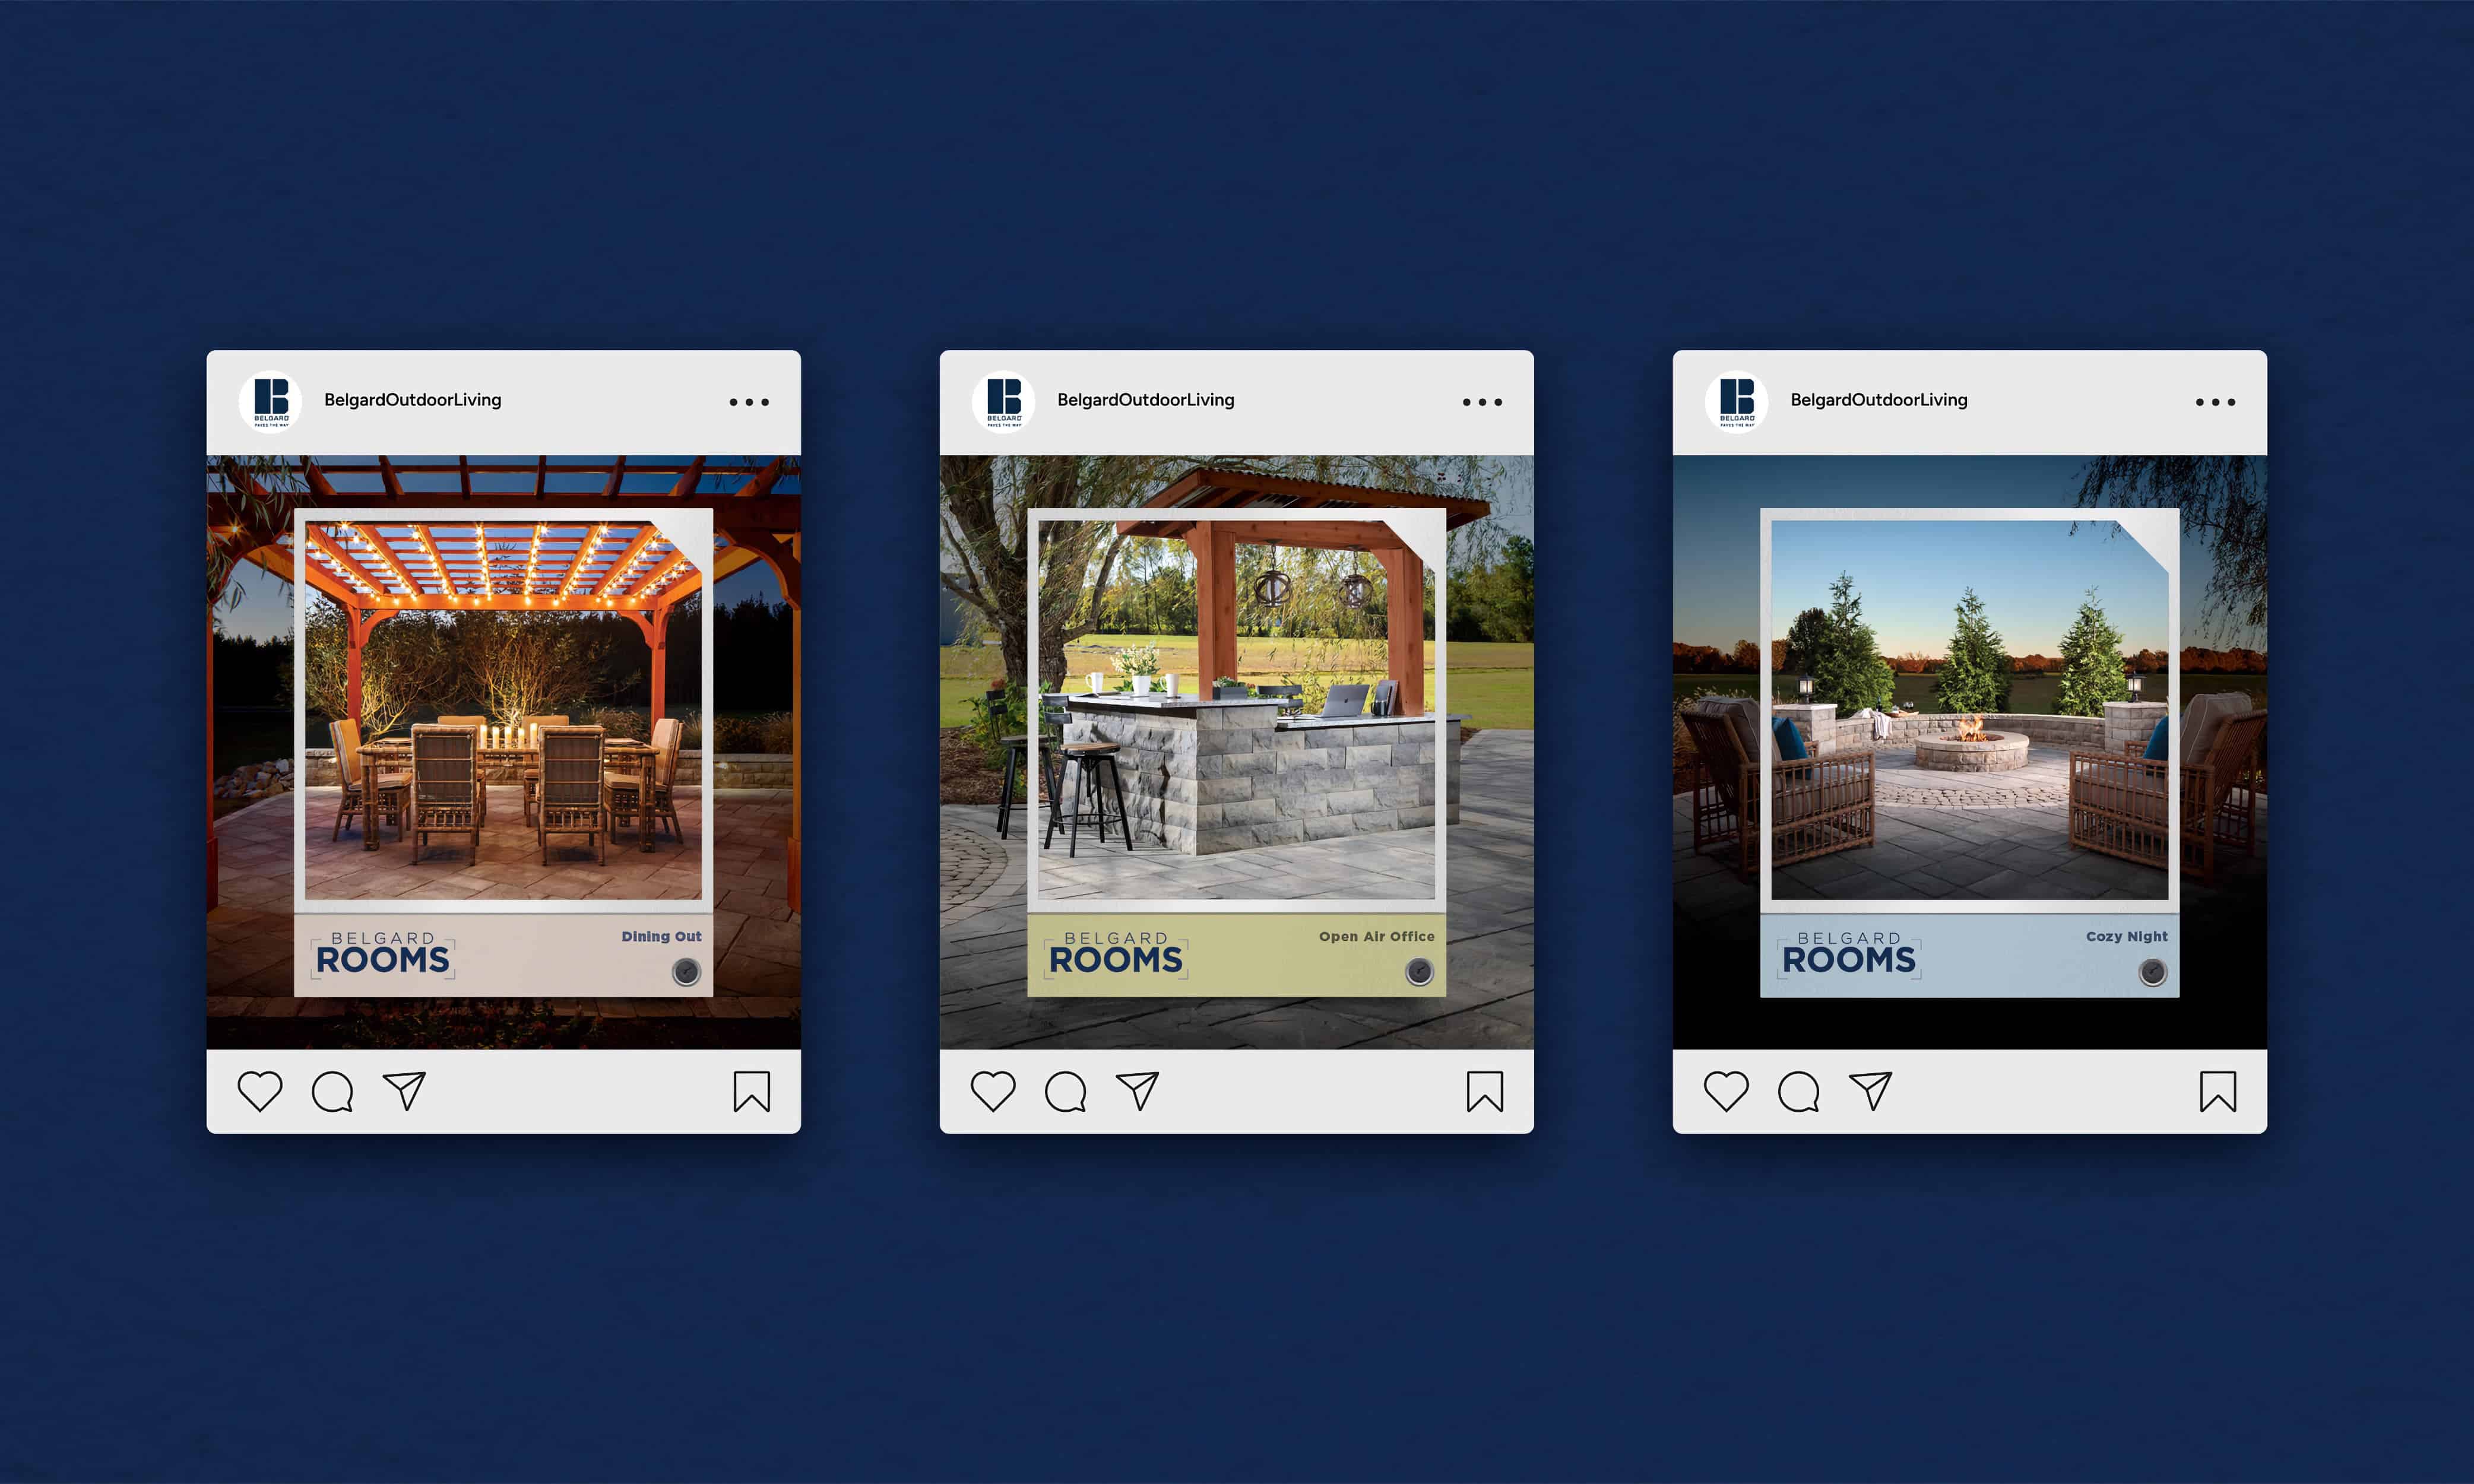 Social posts launching the Belgard Rooms campaign